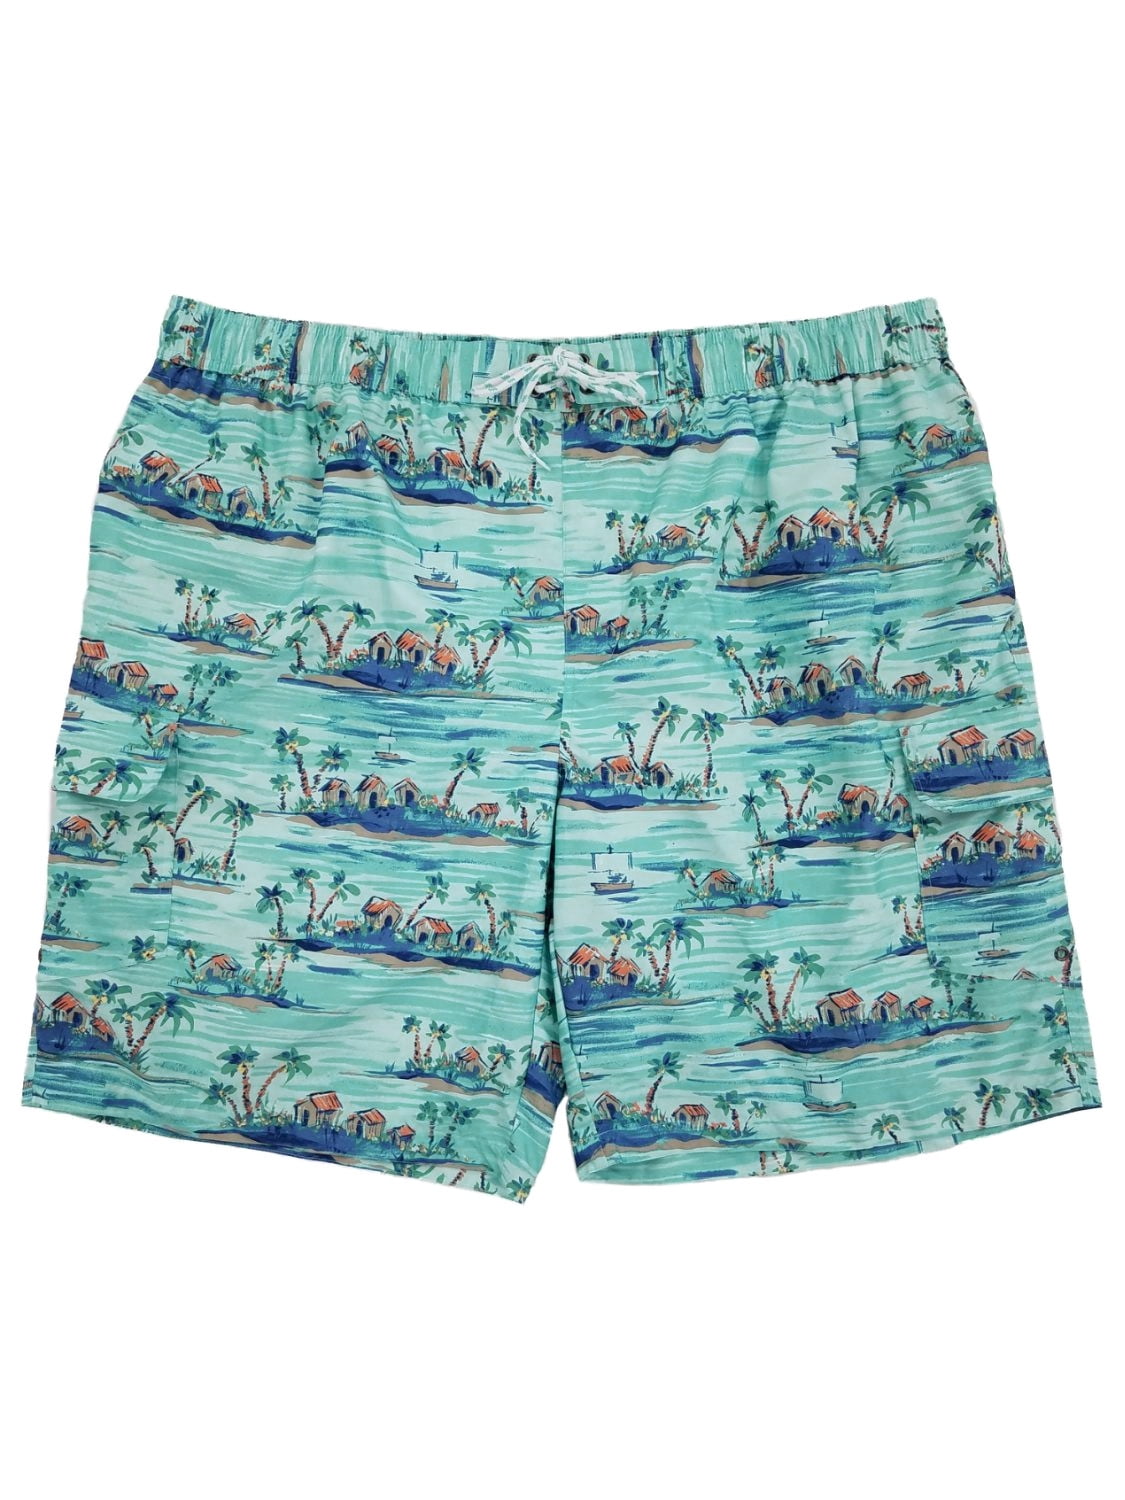 The Foundry - Mens Turquoise Island Tropical Cargo Swim Trunks Board ...